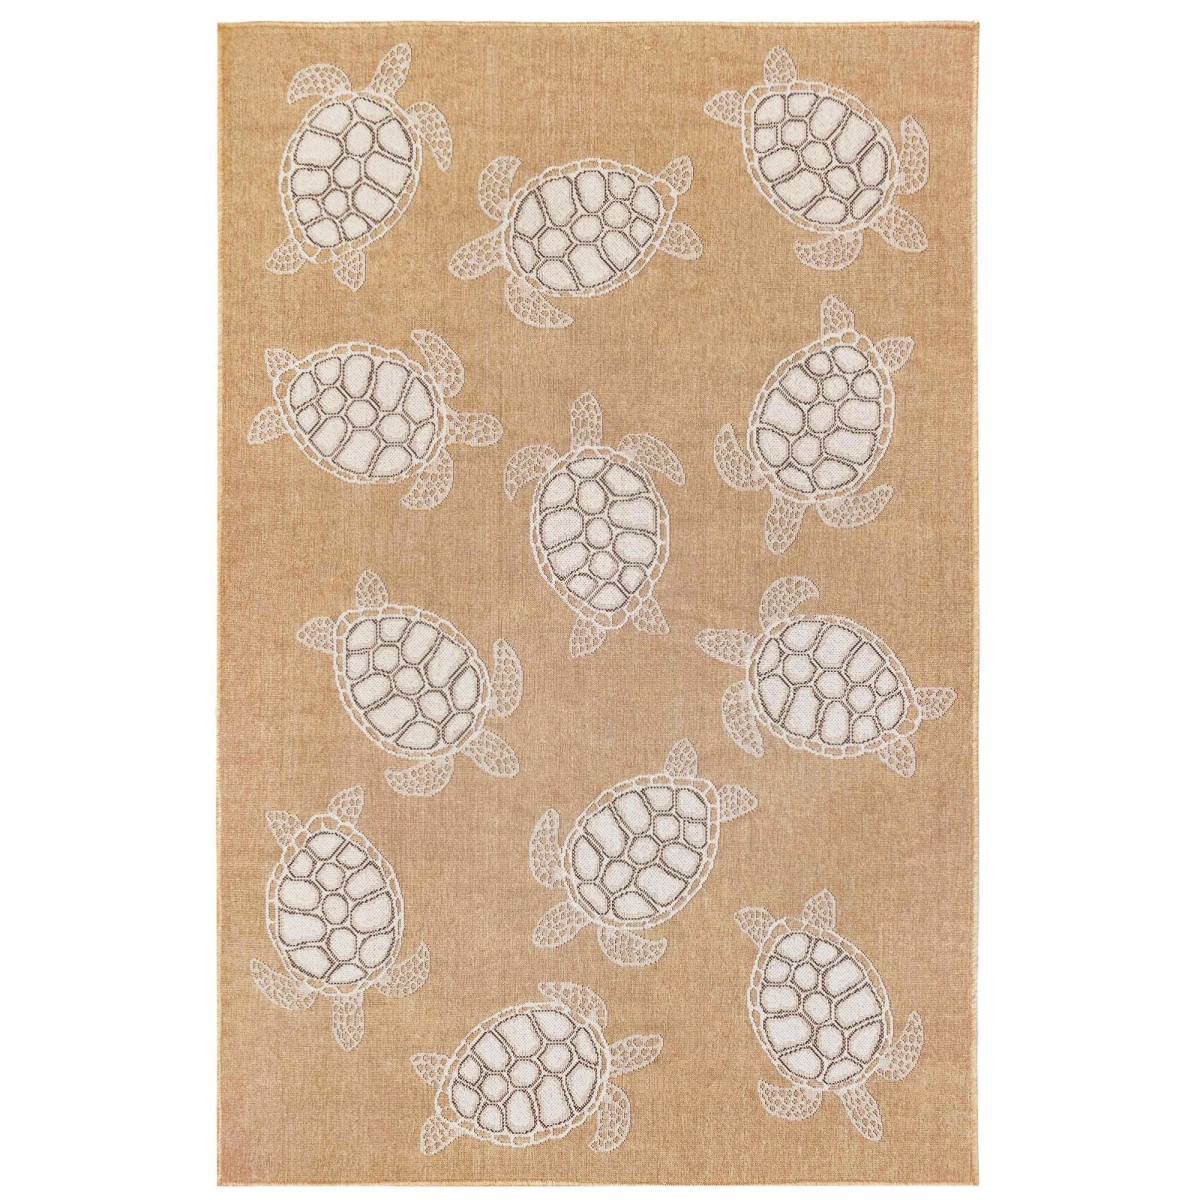 Trans-ocean Imports Cre80841312 7 Ft. 10 In. X 9 Ft. 10 In. Liora Manne Carmel Seaturtles Indoor & Outdoor Wilton Woven Rectangle Rug - Sand